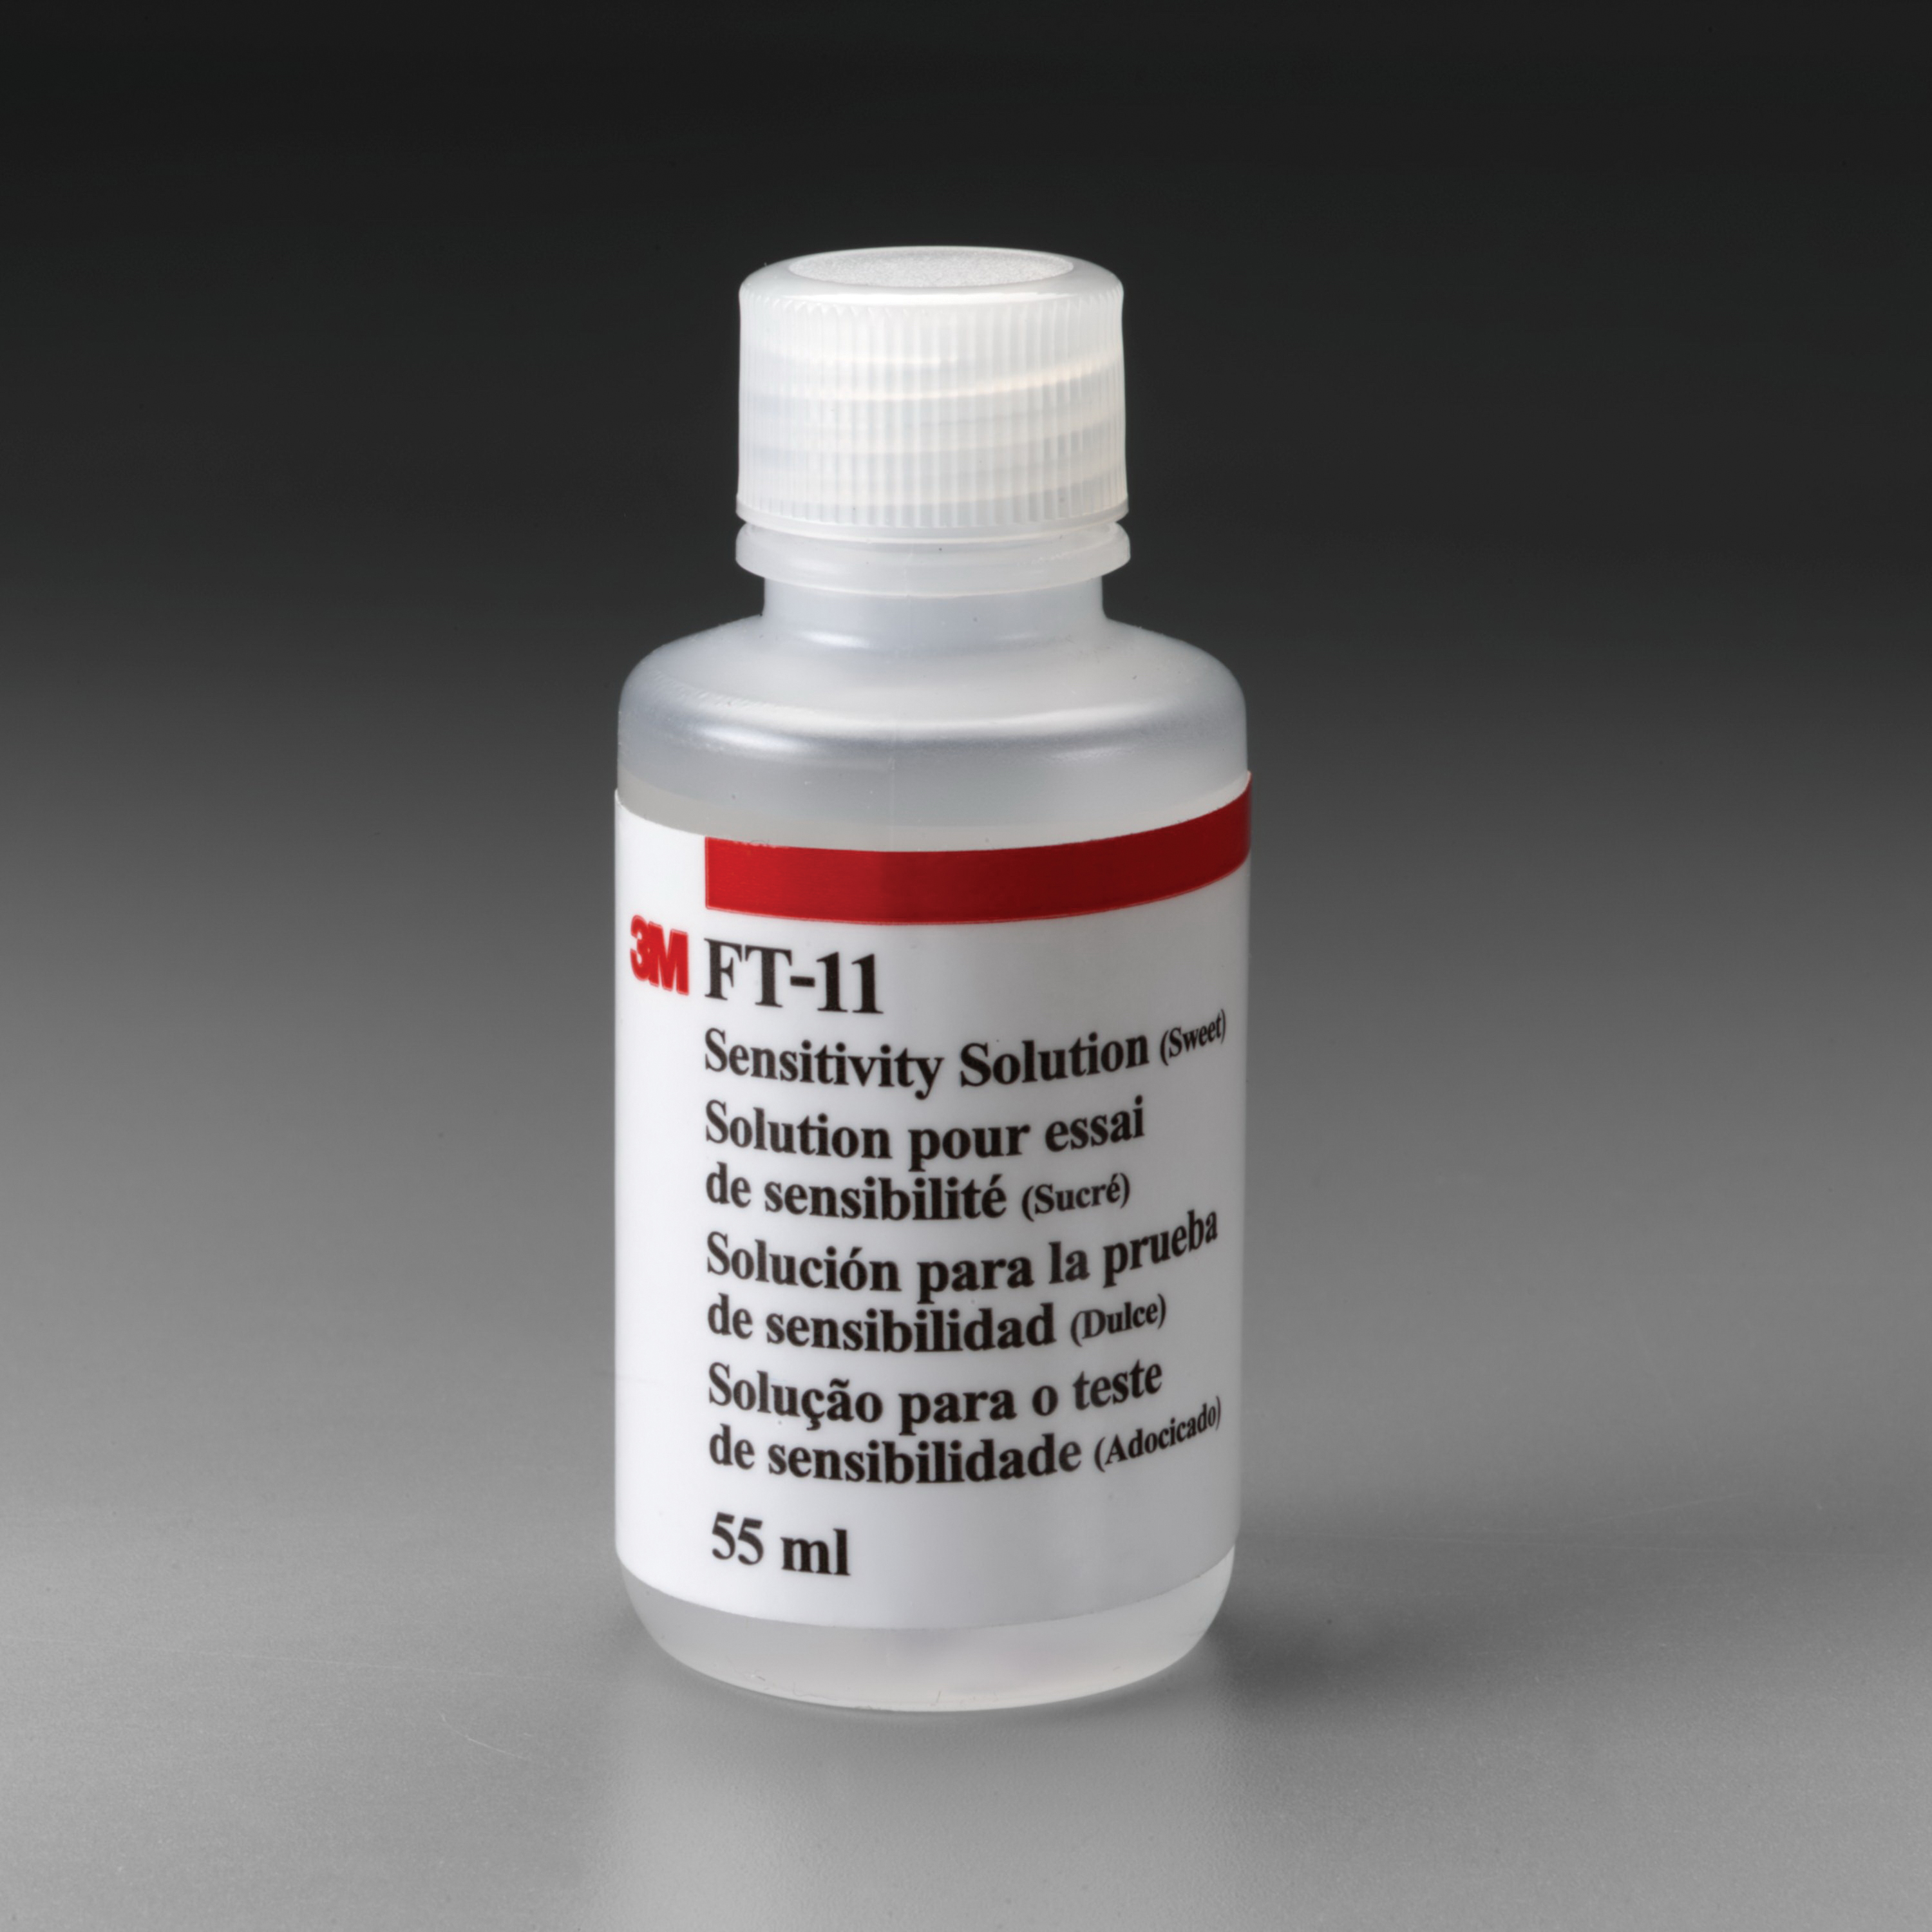 3M™ 051138-16359 Sensitivity Solution, Fit Test Protocol: Saccharin, For Use With FT-10 Qualitative Fit Test Apparatus and FT-20 Training and Fit Testing Case